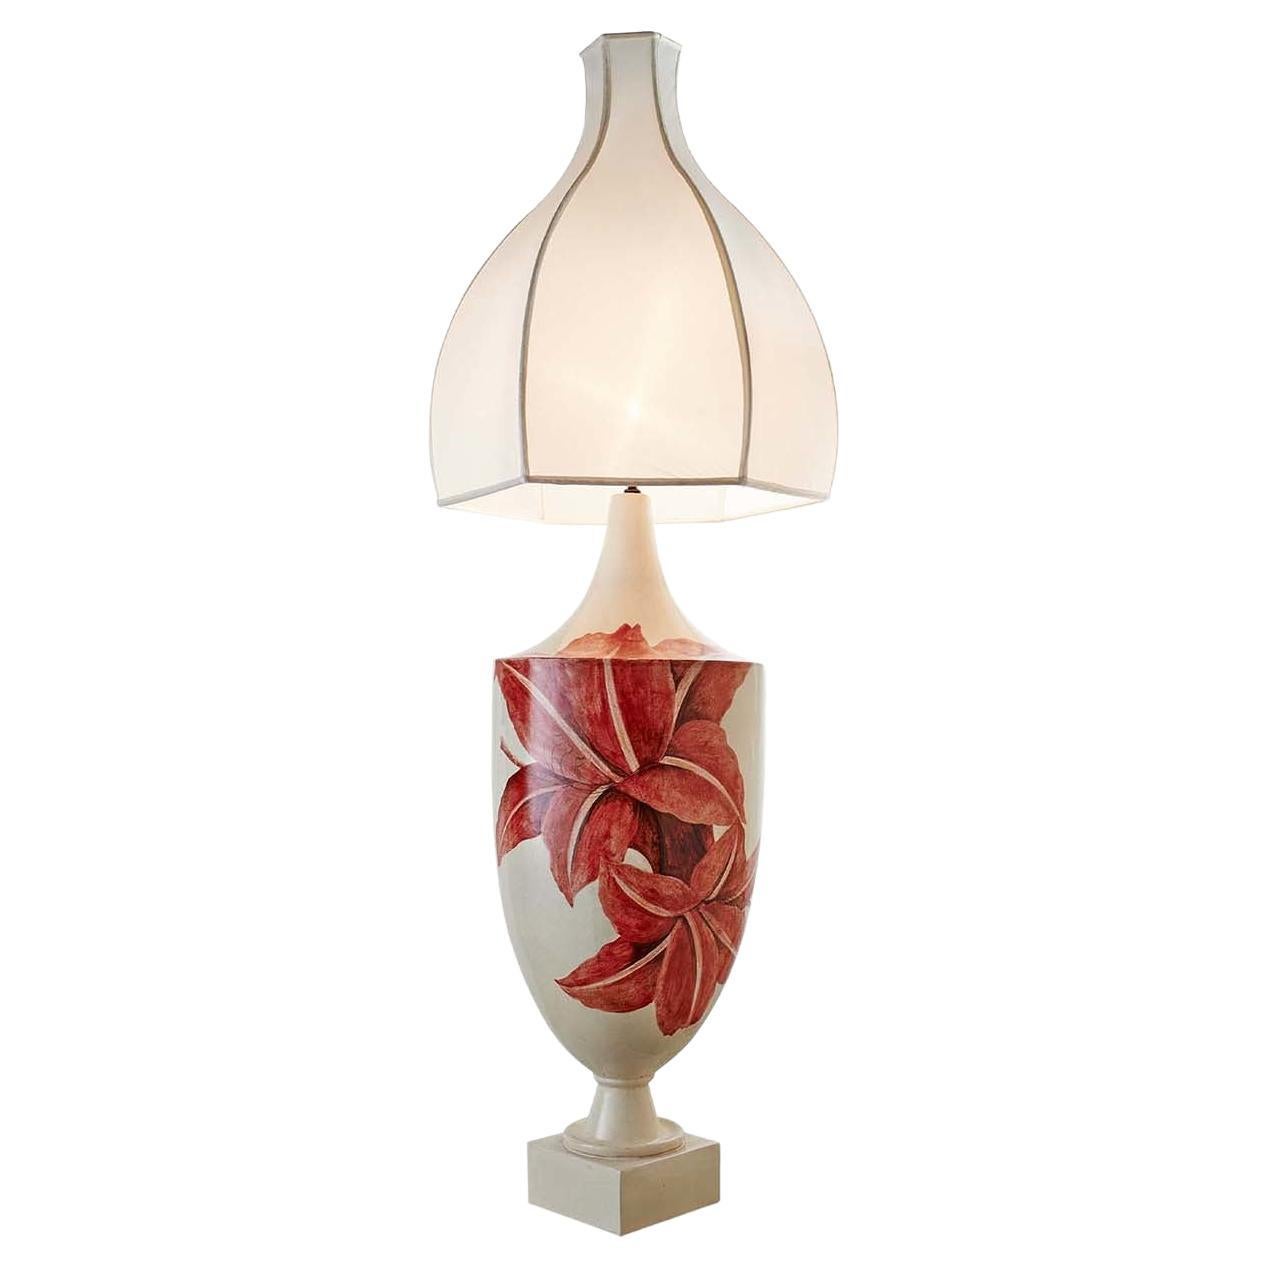 Gio Ponti Table Lamp with Red Lilies